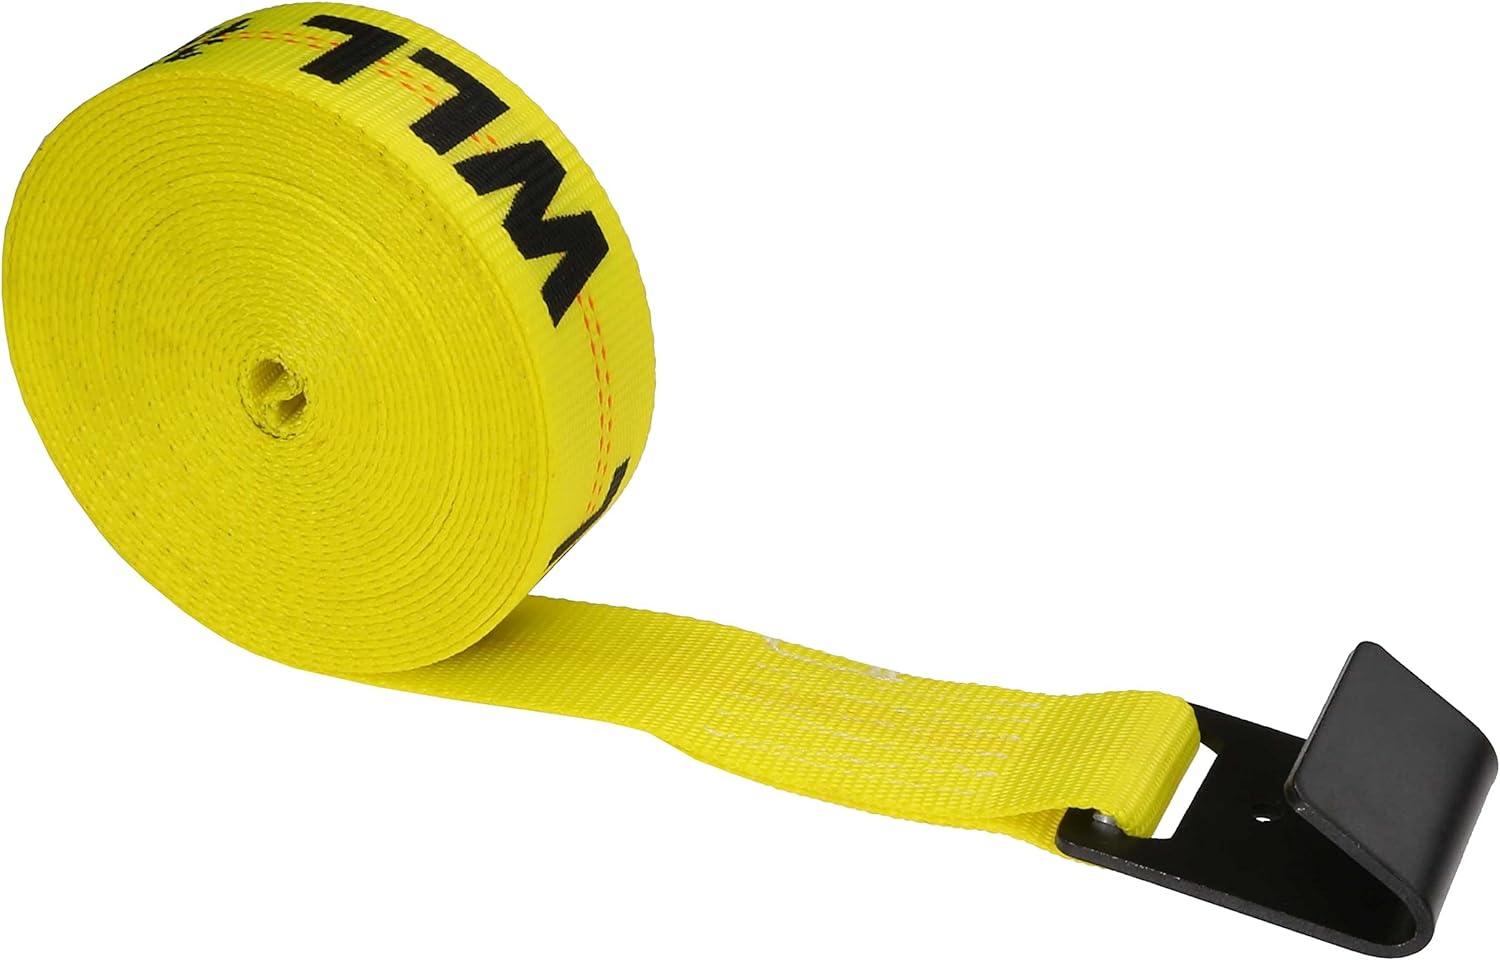 Us Cargo Control 2 Inch x 20 Foot Winch Strap with Flat Hook and Yellow Webbing